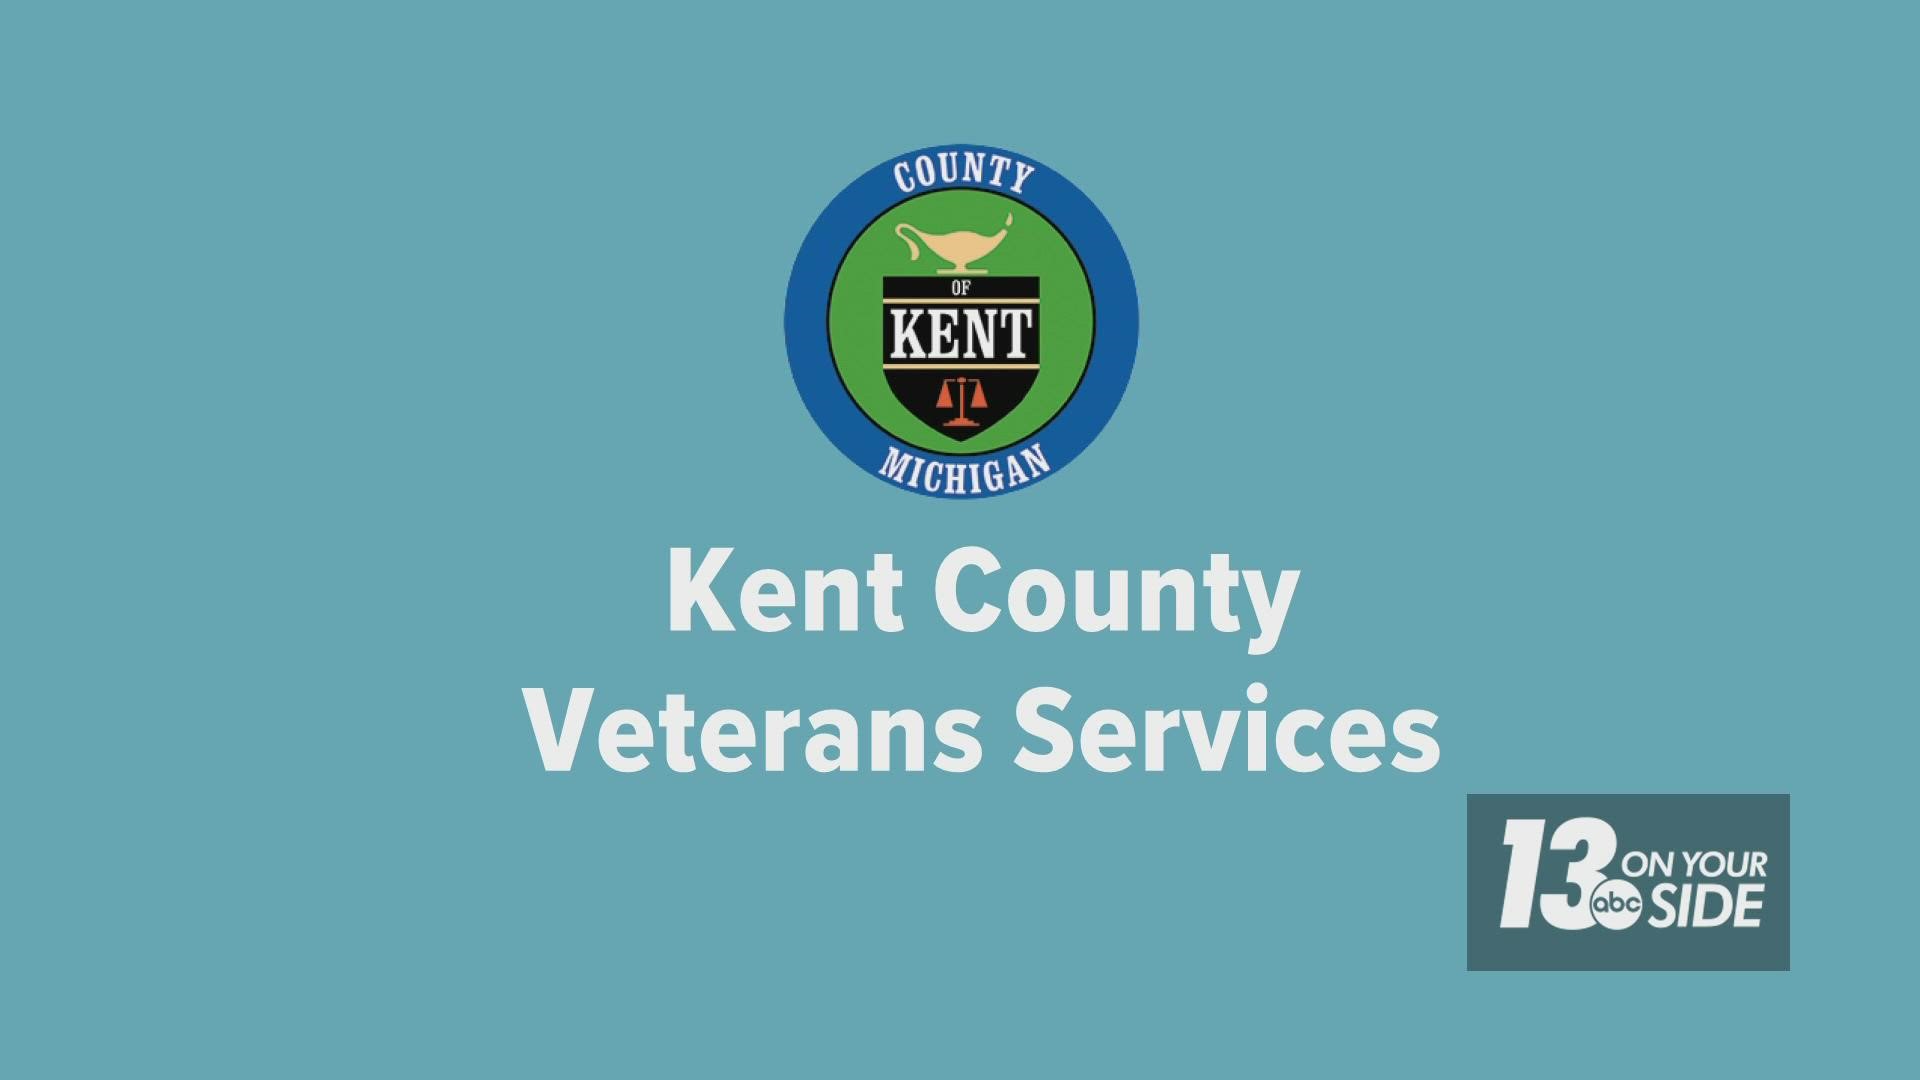 The grant funding is from the Michigan Veterans Affairs Agency and will launch some new initiatives that will help Kent County veterans.